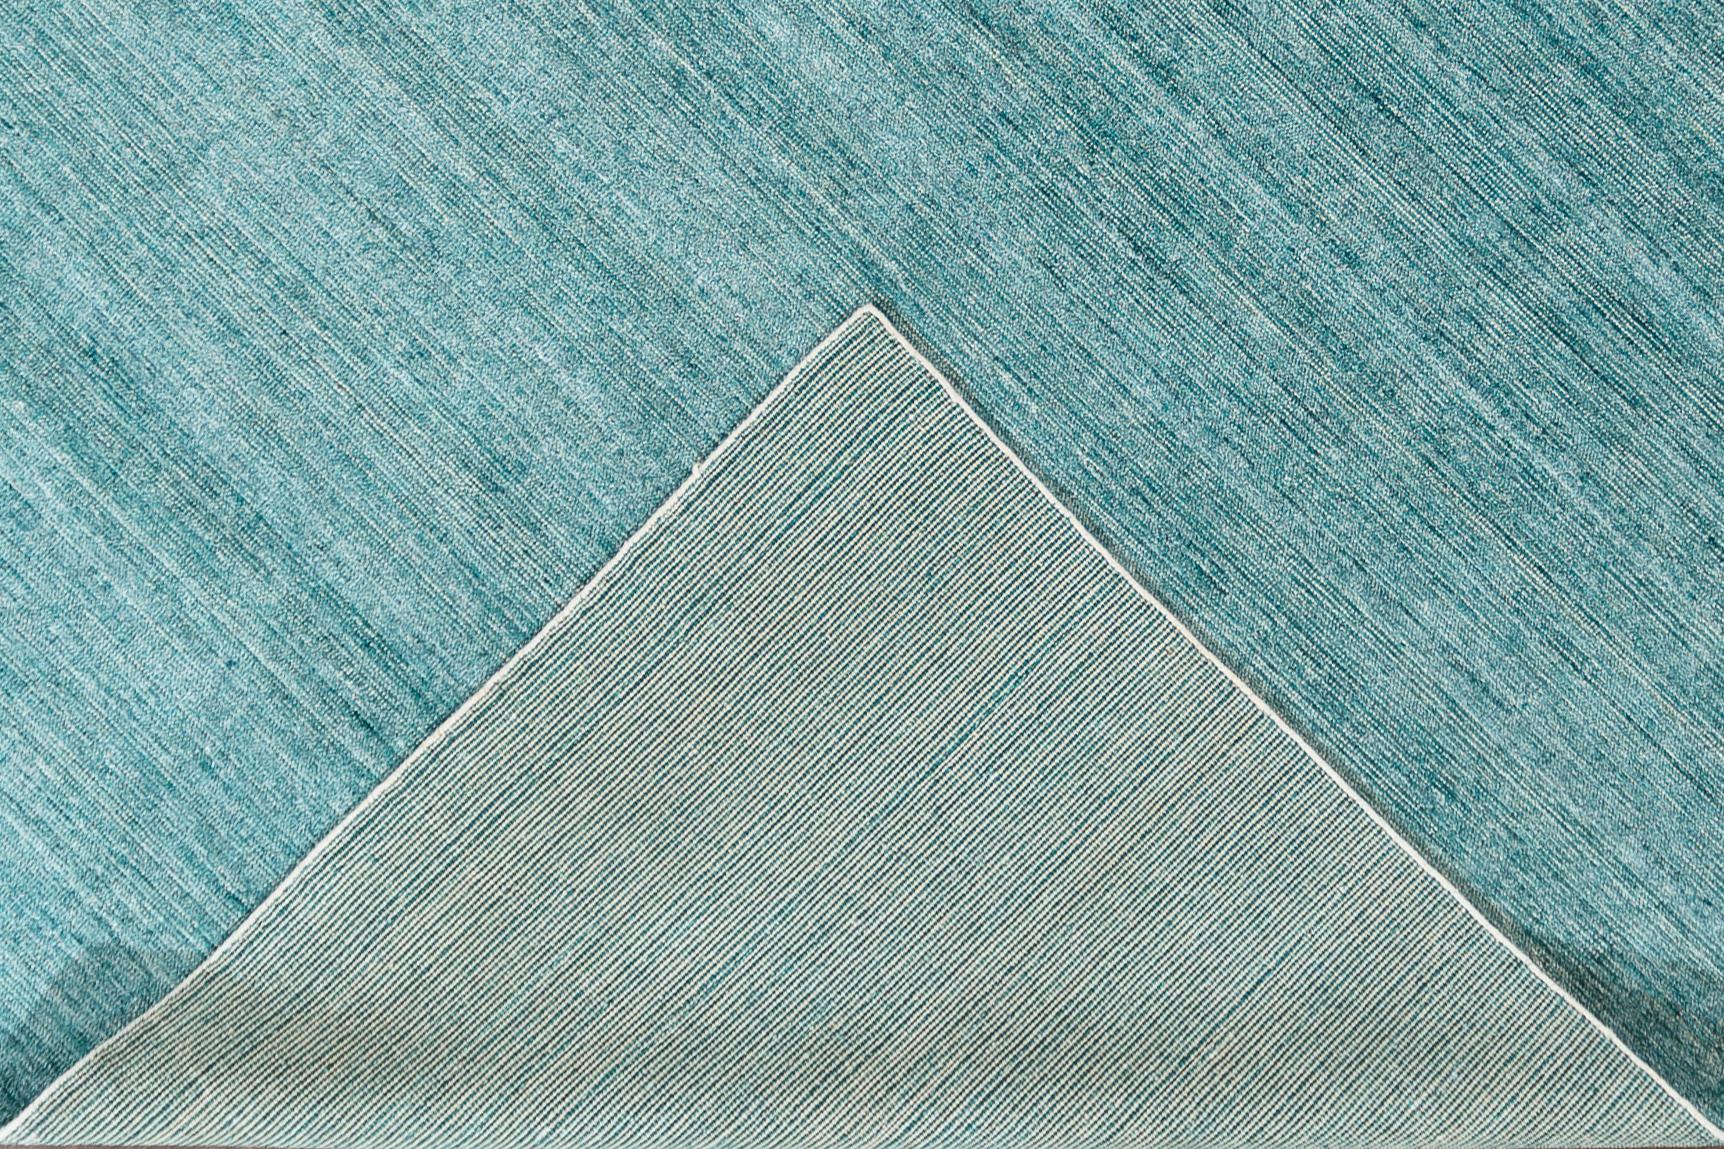 Beautiful modern handmade Indian bamboo and silk boho rug with a teal and ivory field. This Boho collection rug has an all-over solid design.

This rug measures: 9'0